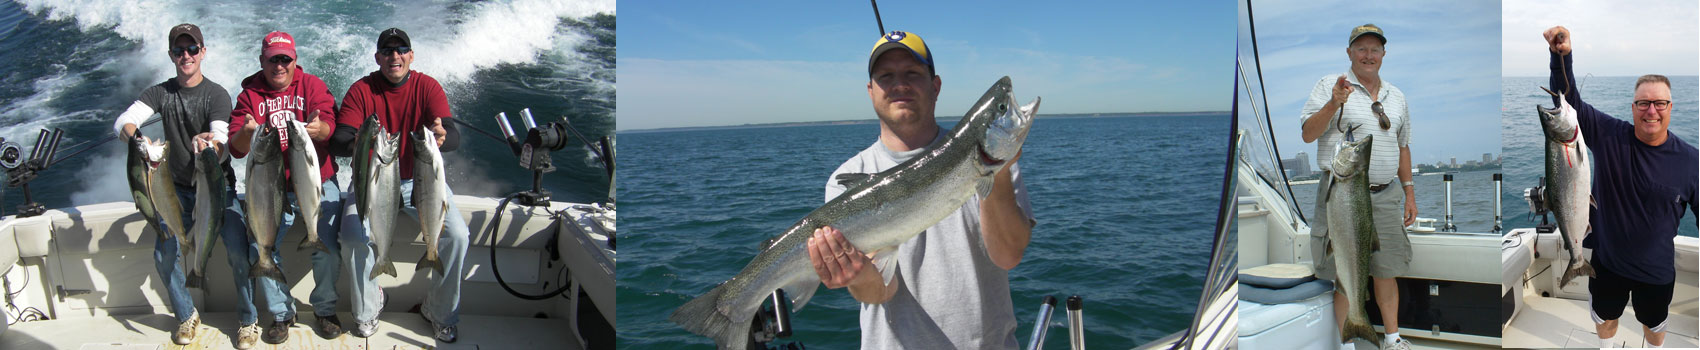 Specials - Fish for 6 hours for only $35 more than the cost of our standard 5 hour charter. The cost of a 6 hour charter on the Blue Max is less than most other charter services 5 hour trip.